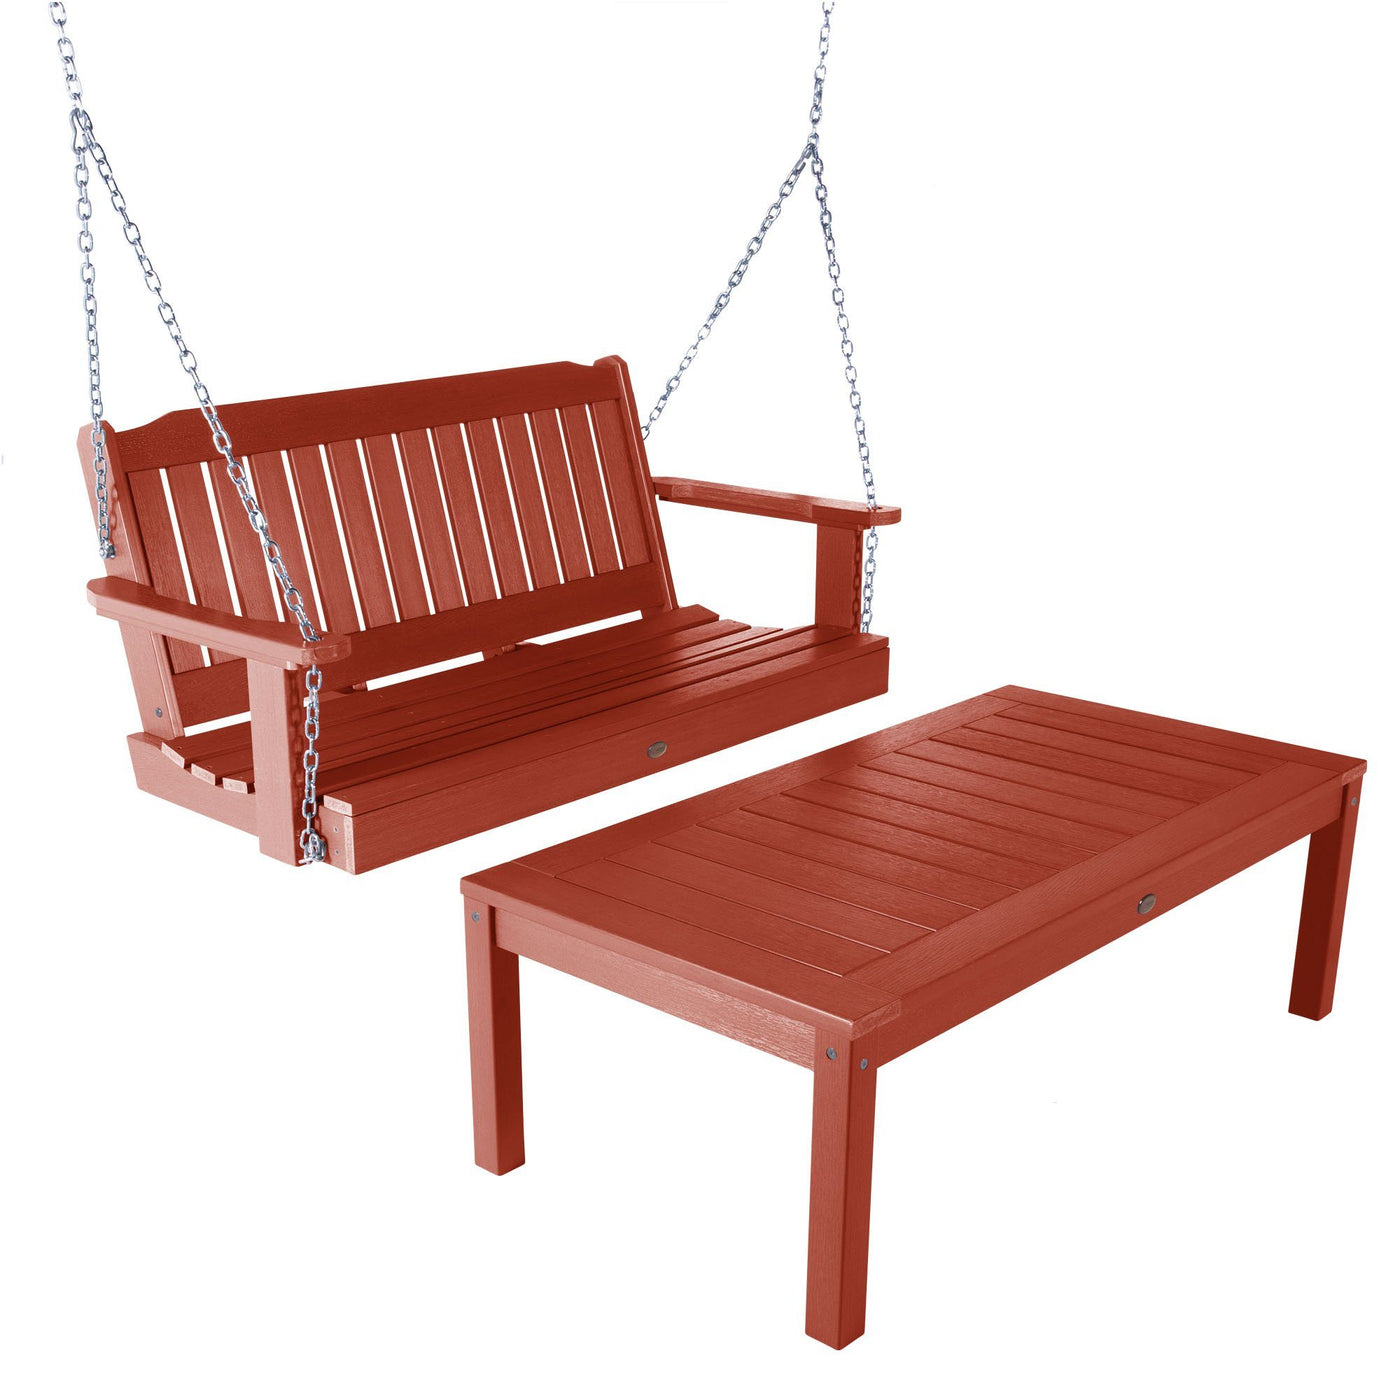 Lehigh 4ft Swing and Adirondack Coffee Table Kitted Sets Highwood USA Rustic Red 